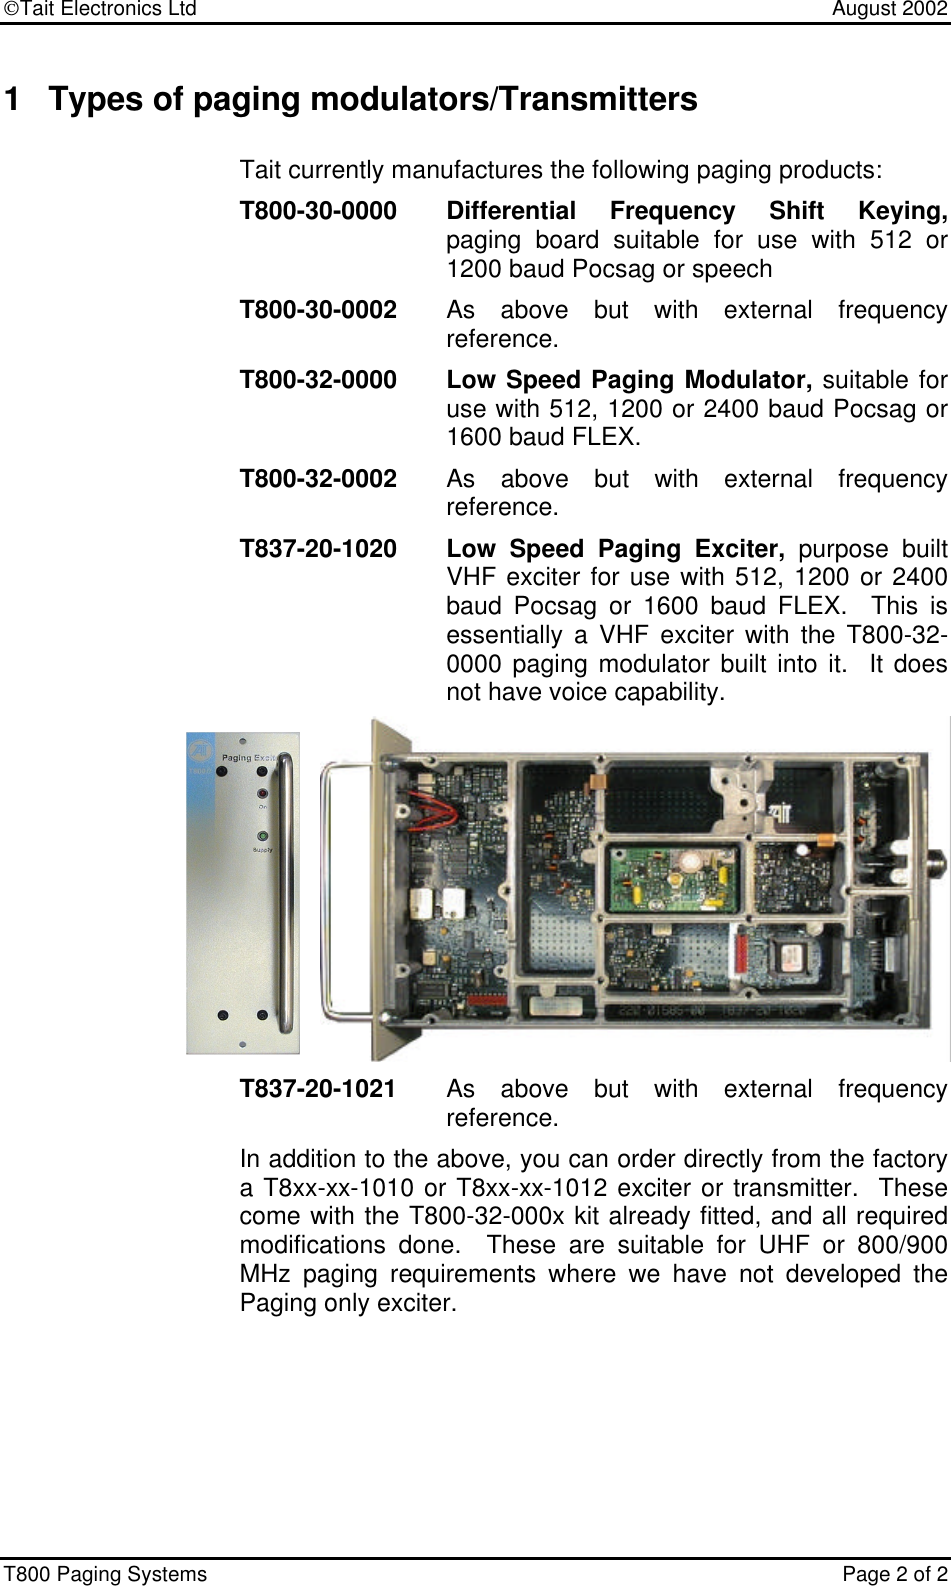 Tait Electronics Ltd    August 2002 T800 Paging Systems  Page 2 of 2  1 Types of paging modulators/Transmitters Tait currently manufactures the following paging products: T800-30-0000 Differential Frequency Shift Keying, paging board suitable for use with 512 or 1200 baud Pocsag or speech T800-30-0002 As above but with external frequency reference. T800-32-0000 Low Speed Paging Modulator, suitable for use with 512, 1200 or 2400 baud Pocsag or 1600 baud FLEX. T800-32-0002 As above but with external frequency reference. T837-20-1020 Low Speed Paging Exciter, purpose built VHF exciter for use with 512, 1200 or 2400 baud Pocsag or 1600 baud FLEX.  This is essentially a VHF exciter with the T800-32-0000 paging modulator built into it.  It does not have voice capability. T837-20-1021 As above but with external frequency reference. In addition to the above, you can order directly from the factory a T8xx-xx-1010 or T8xx-xx-1012 exciter or transmitter.  These come with the T800-32-000x kit already fitted, and all required modifications done.  These are suitable for UHF or 800/900 MHz paging requirements where we have not developed the Paging only exciter.  